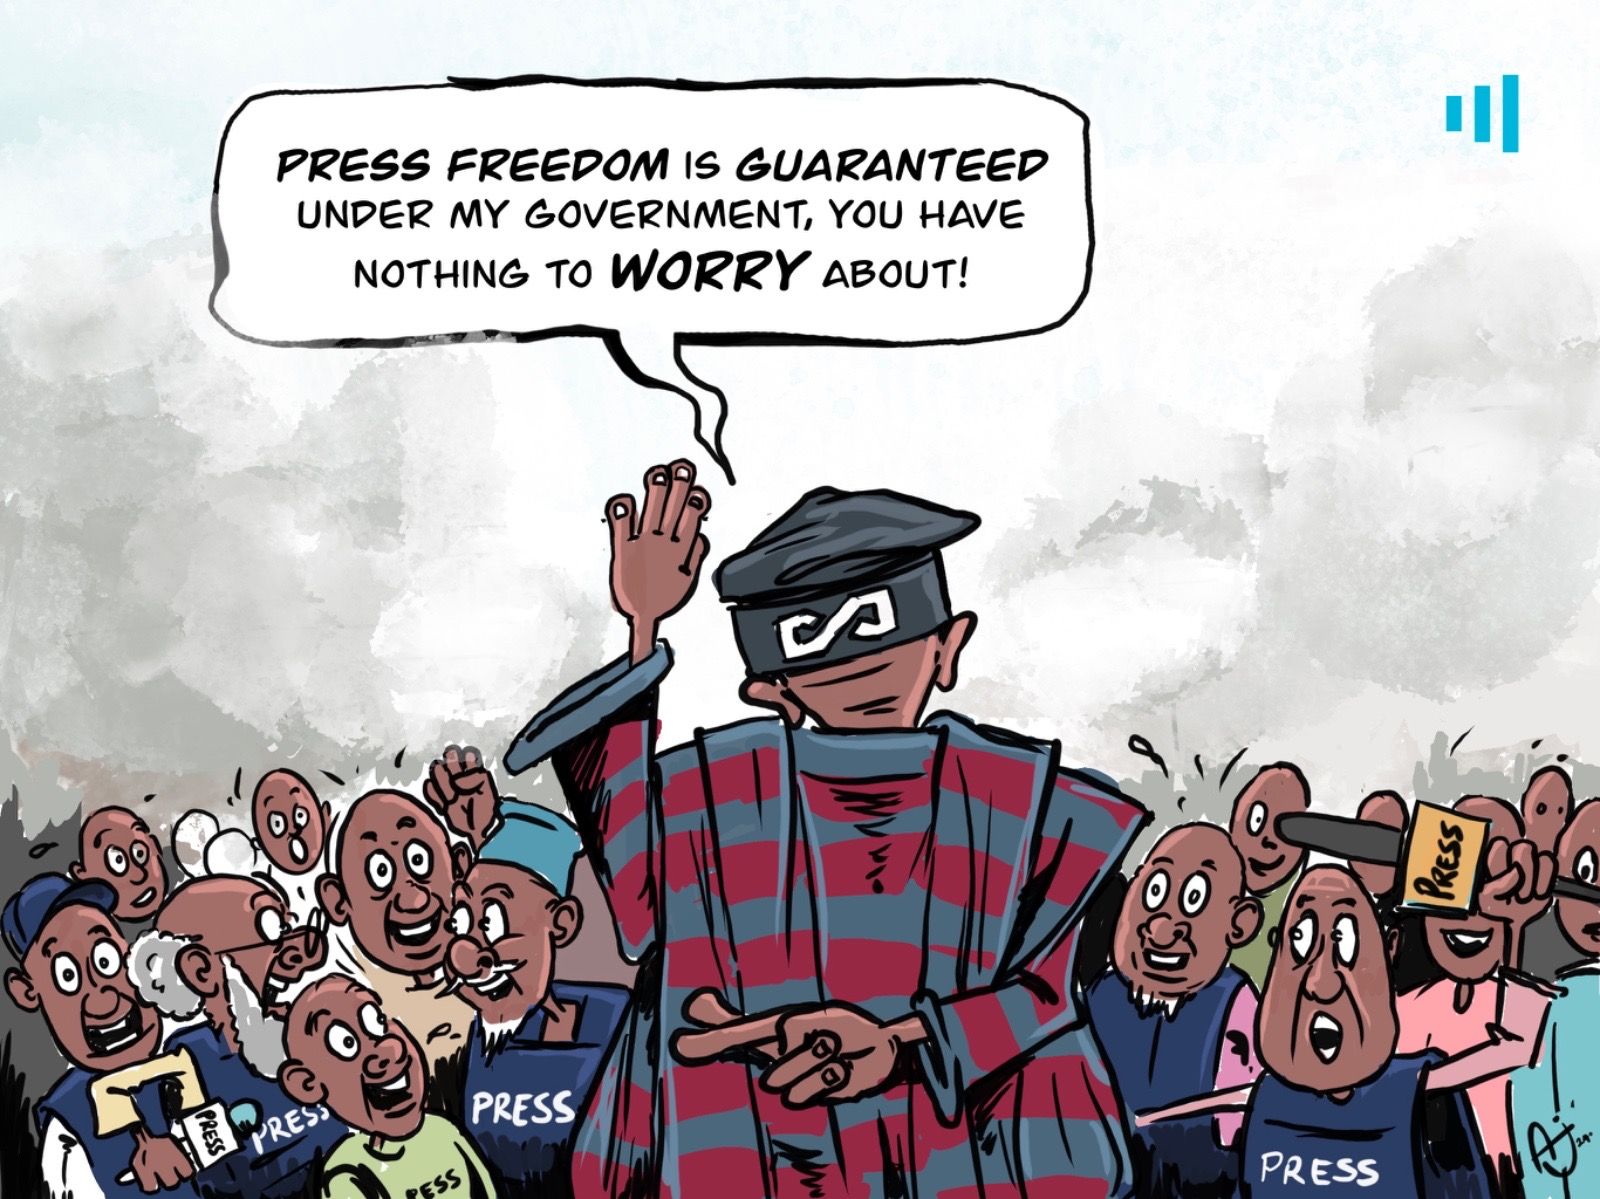 Cartoon of a blindfolded figure stating press freedom is guaranteed, surrounded by skeptical cartoon journalists.